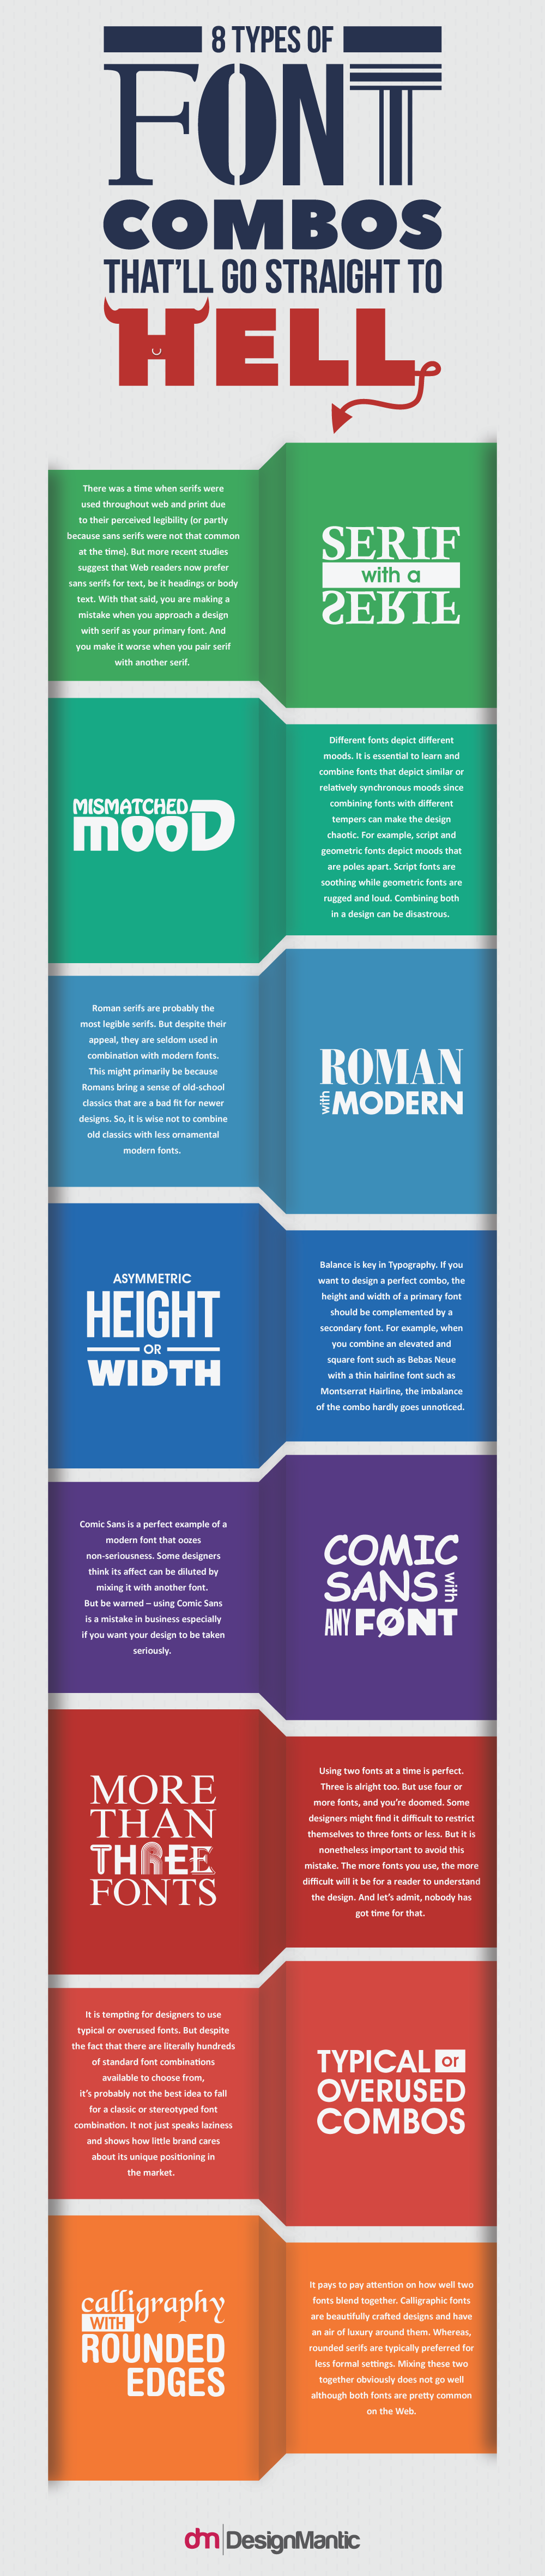 Types Of Font Combos